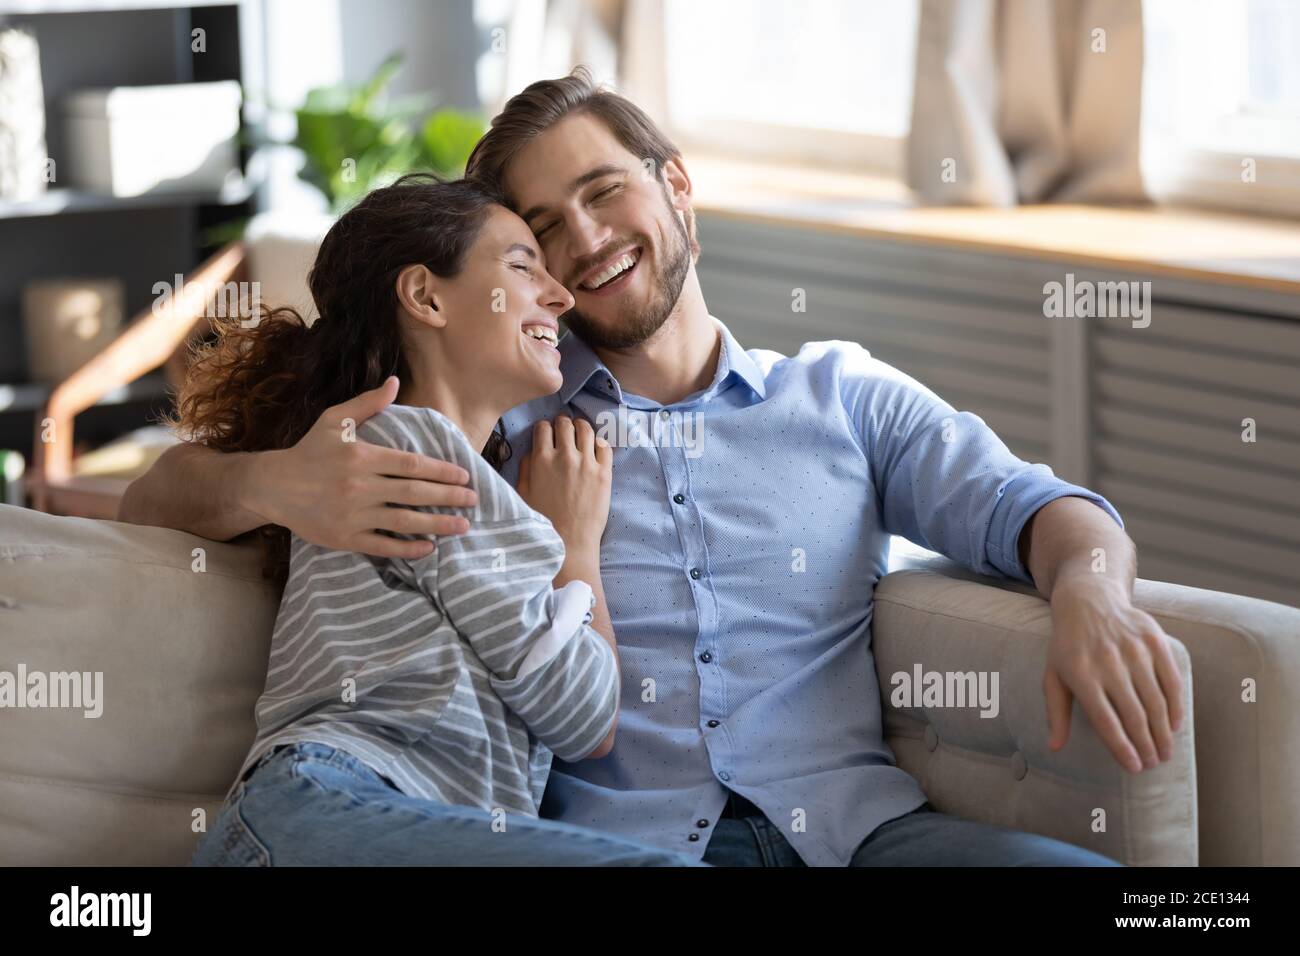 Emotional positive romantic family couple laughing at funny joke. Stock Photo